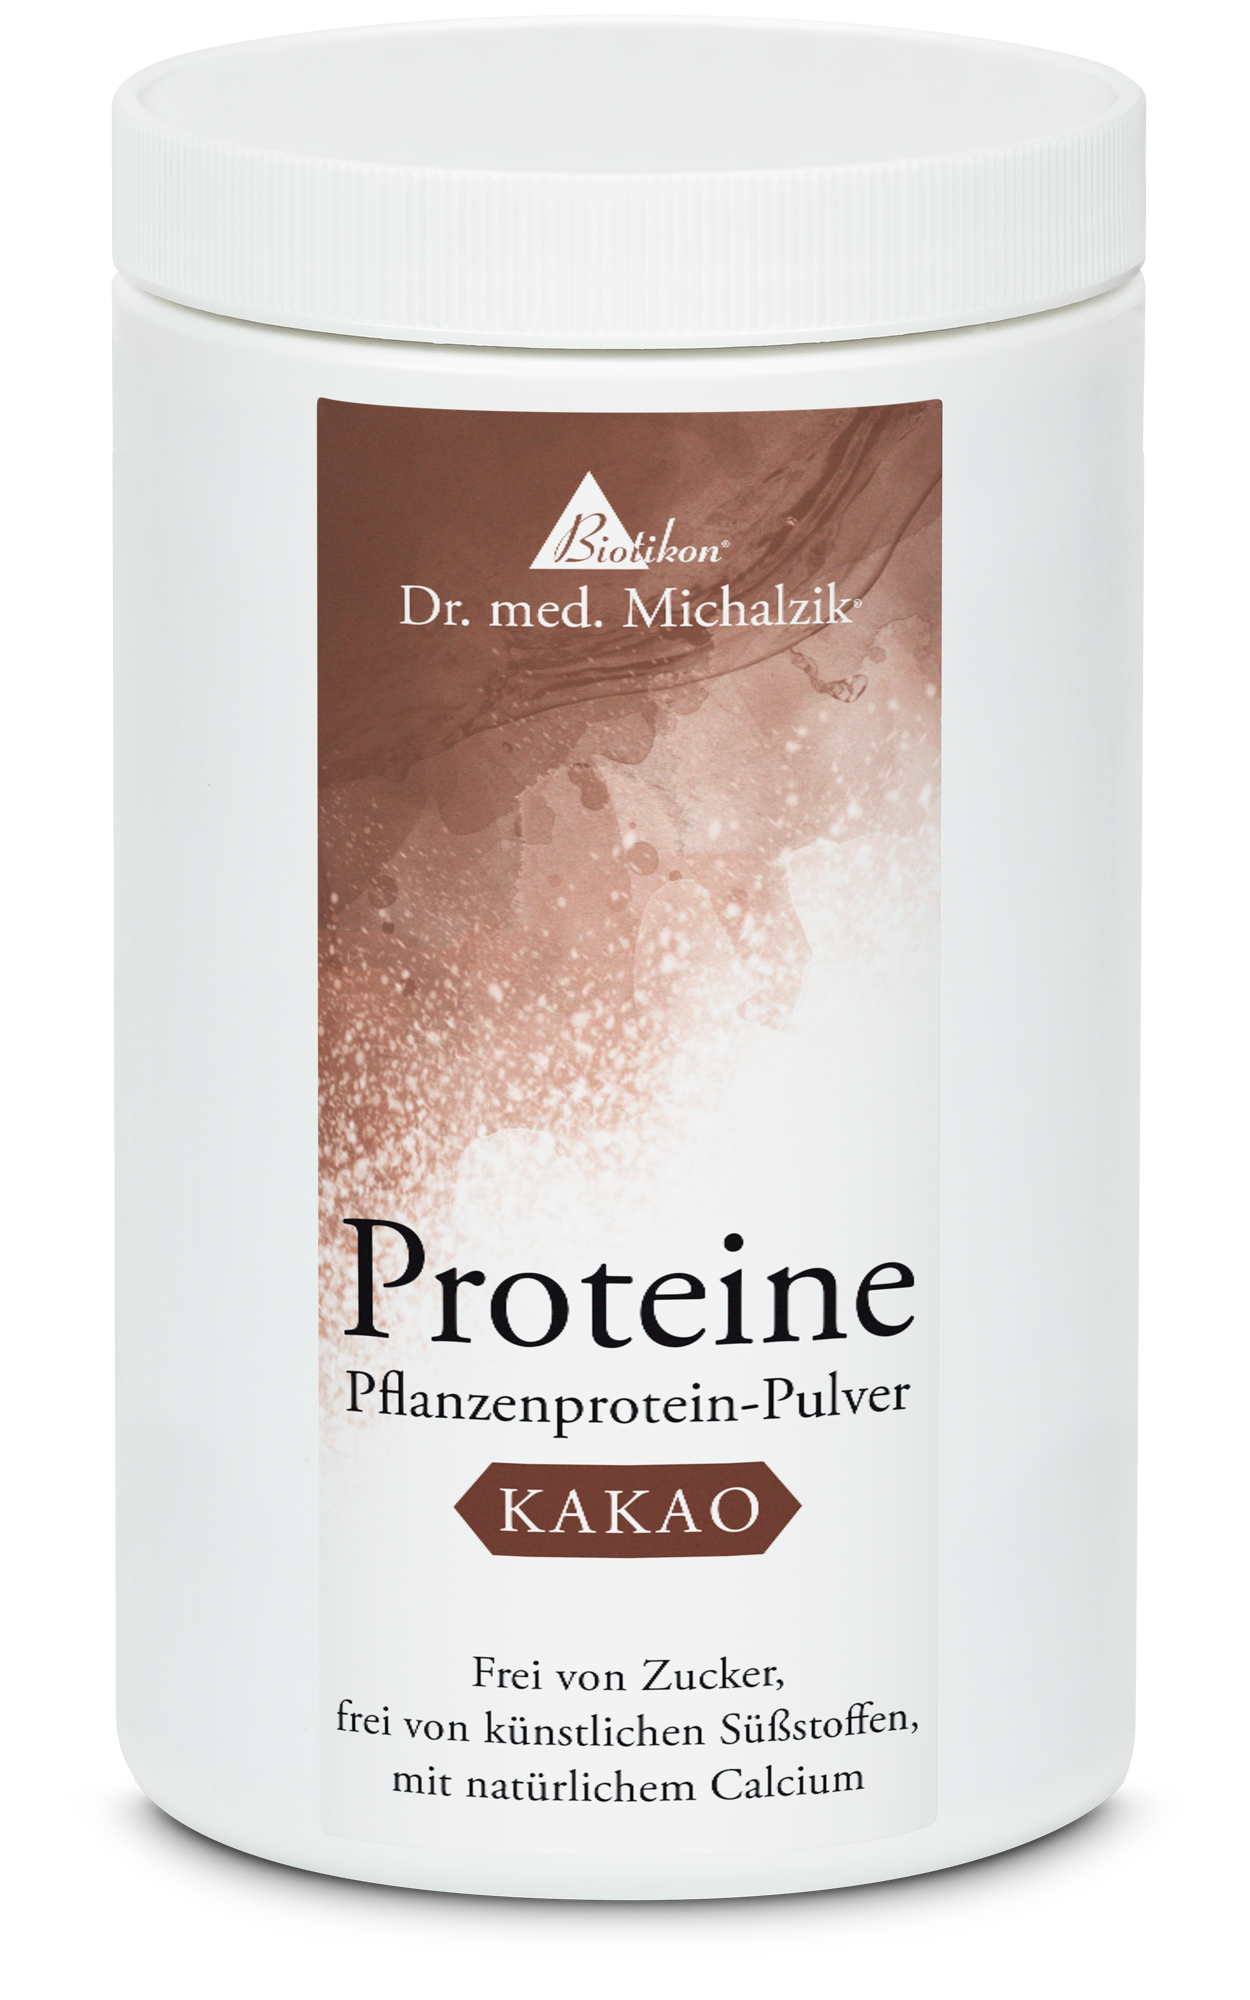 Proteine - Cacao gustose di Dr. med. Michalzik